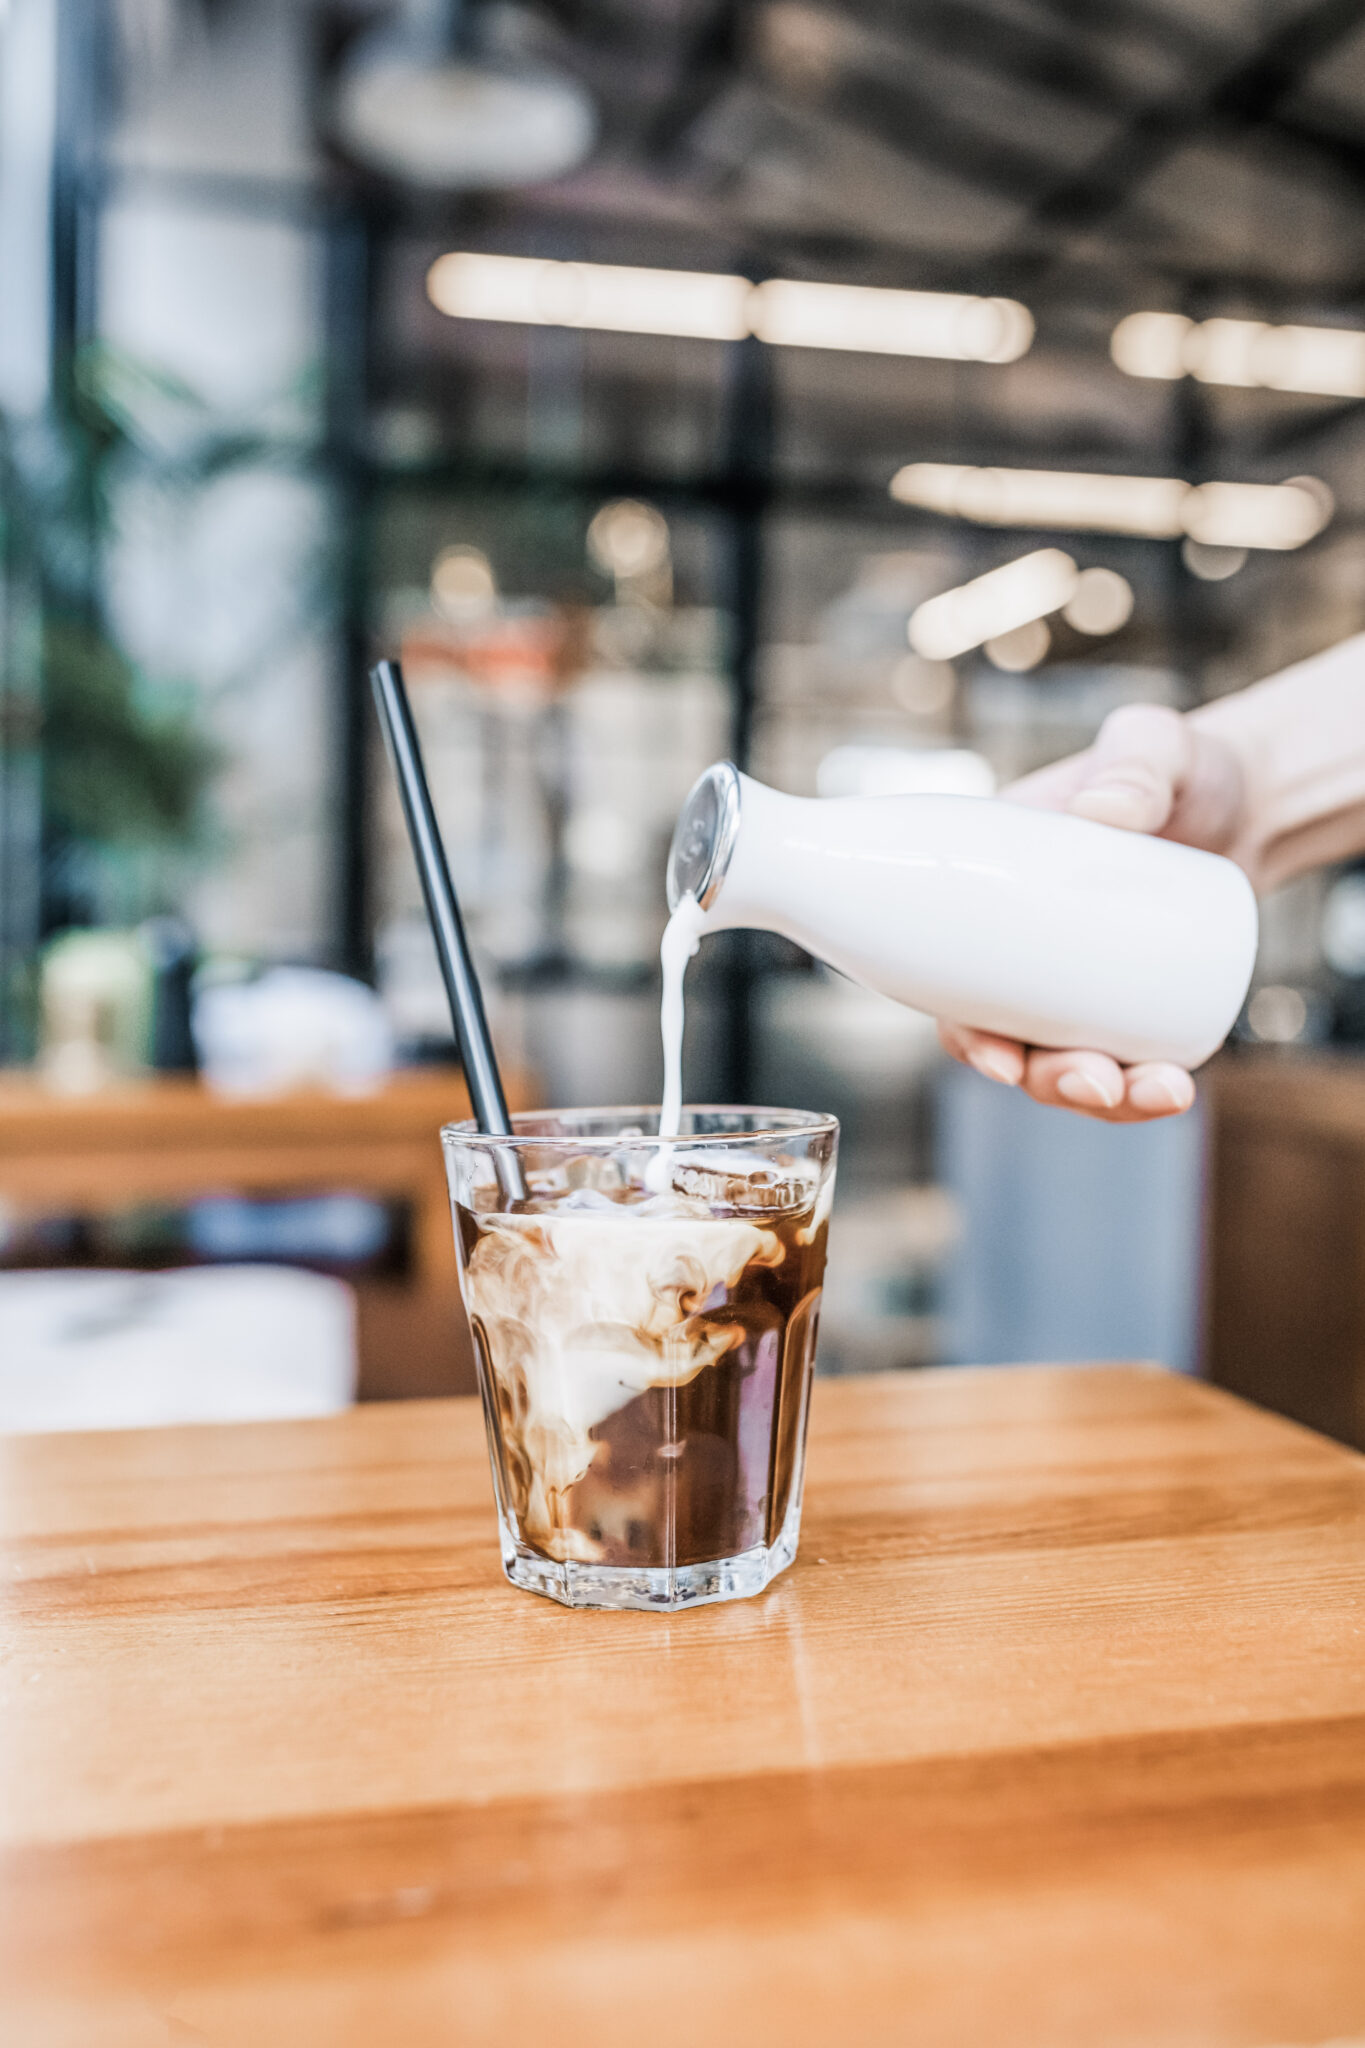 Making an iced latte by pouring cream into a cup of espresso. This article covers how to make Starbucks Caffe Latte.